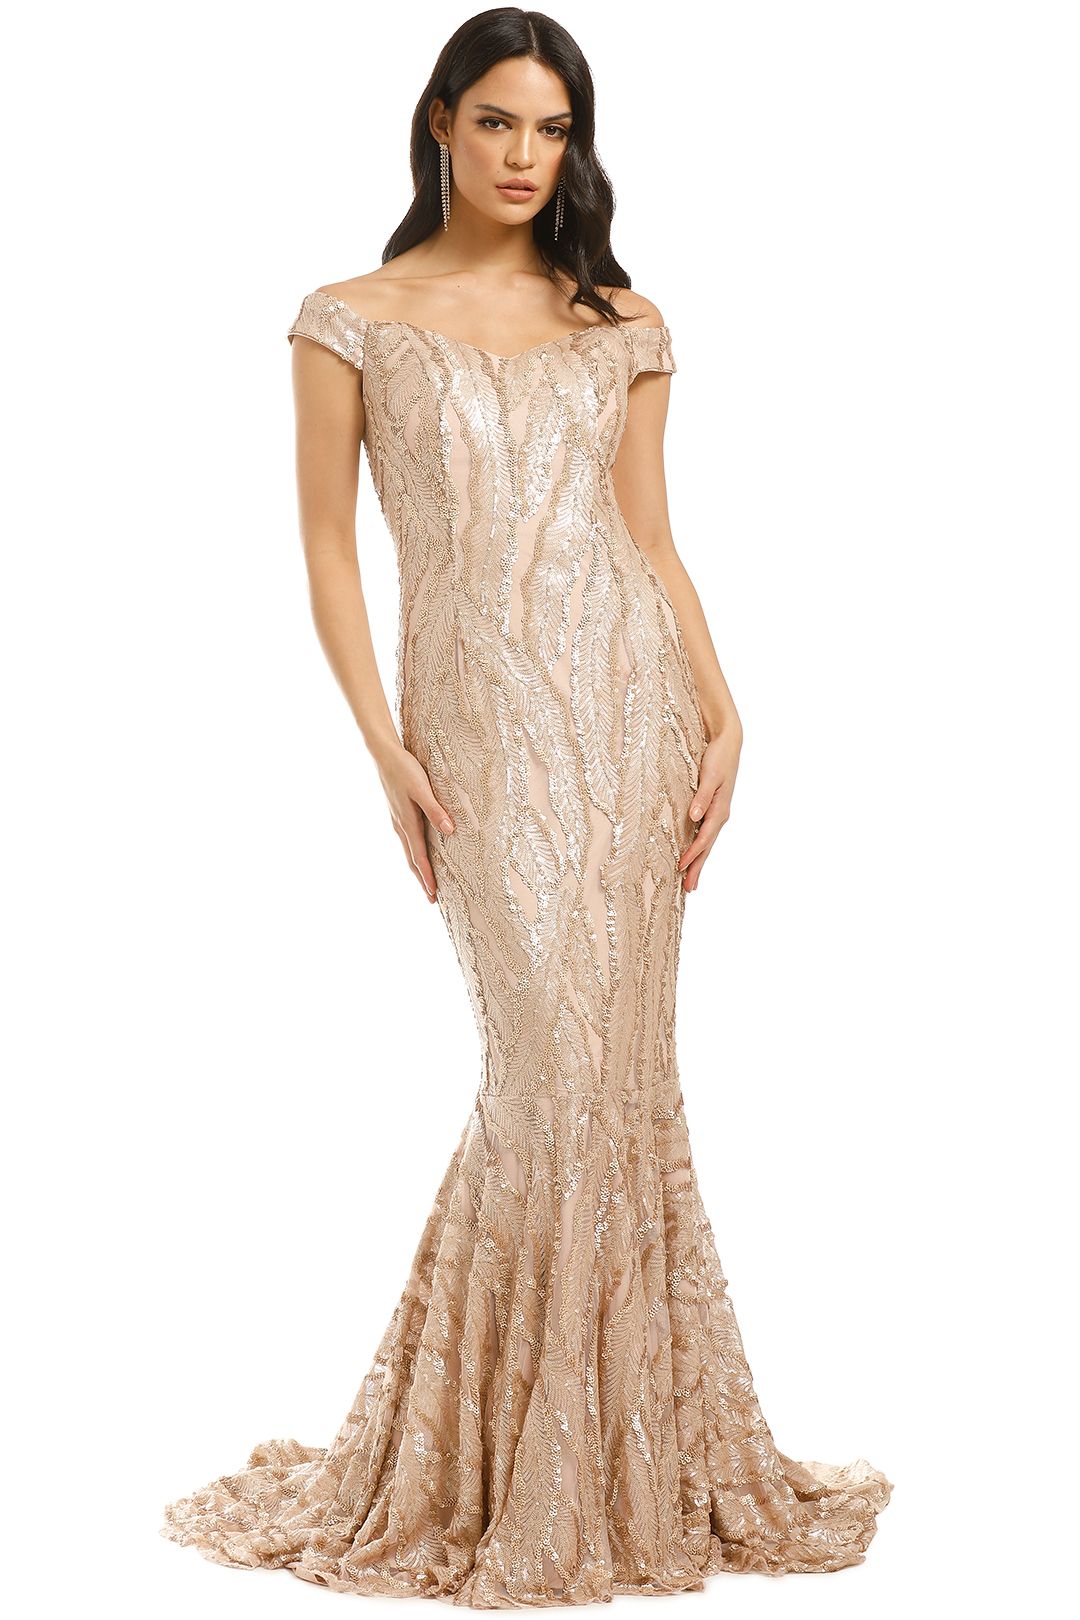 Jadore - Kayley Gown - Champagne